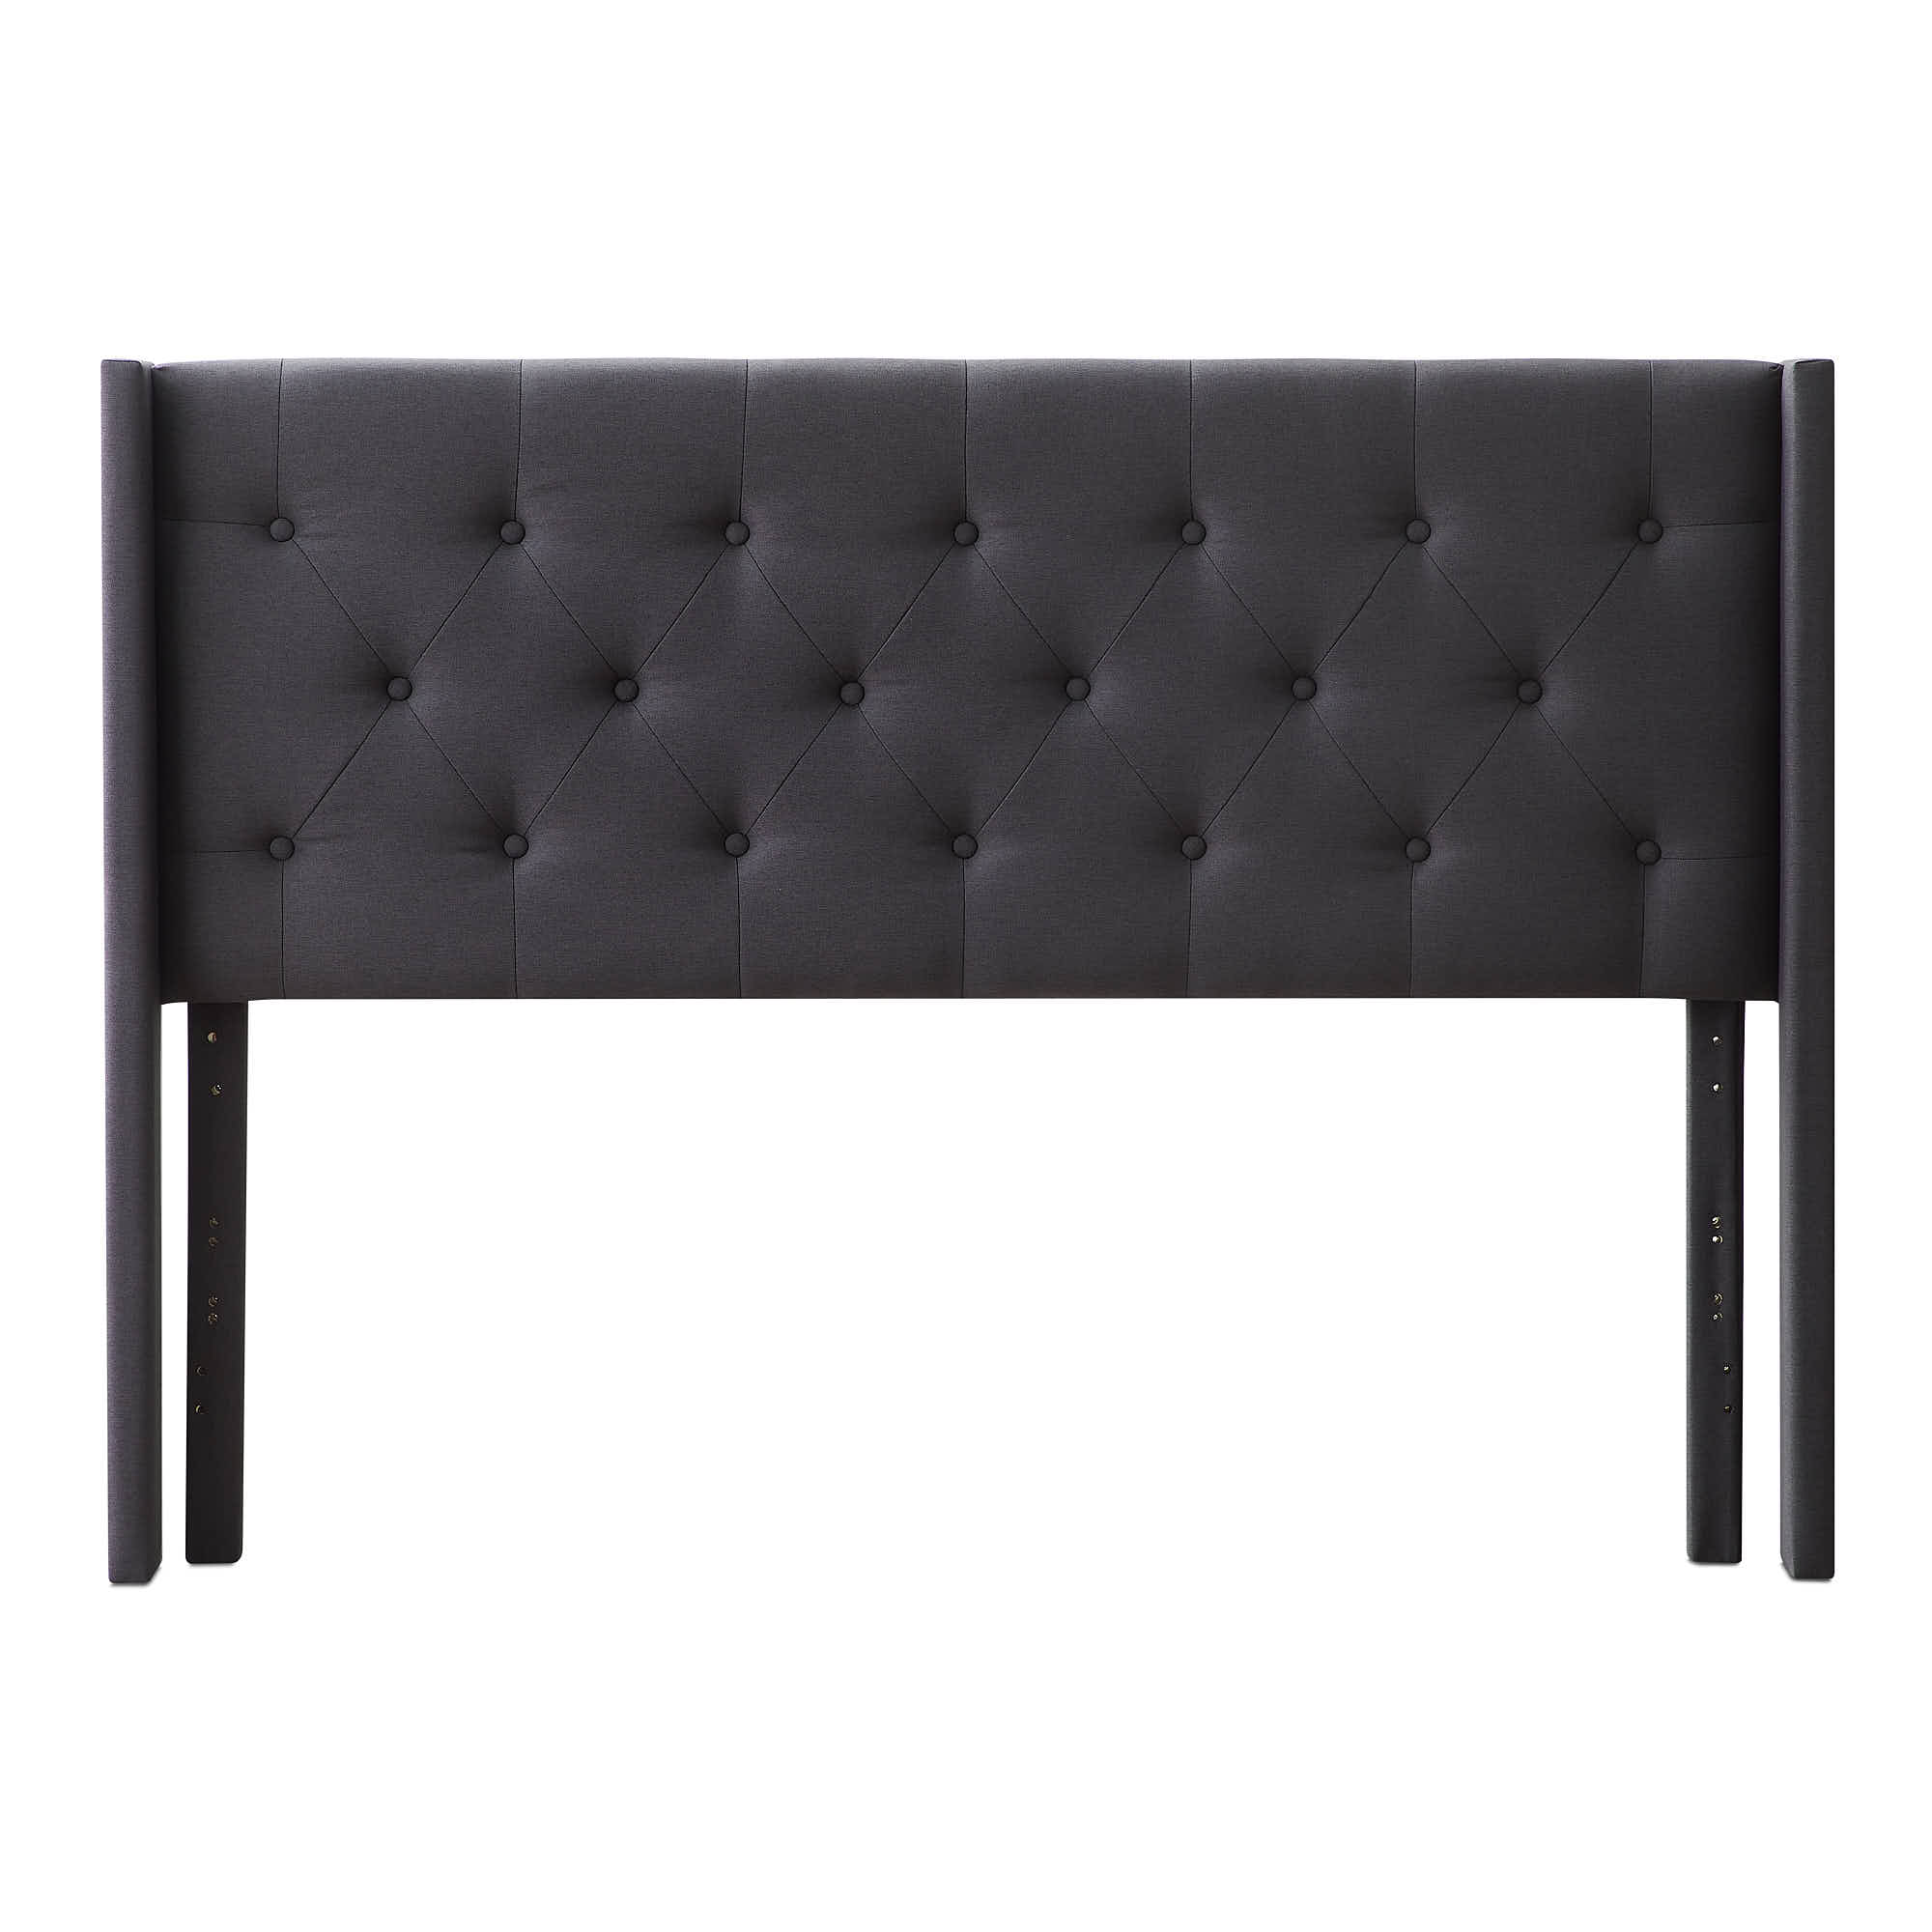 Rest Haven Button Tufted Upholstered Headboard, Queen, Charcoal - image 4 of 9